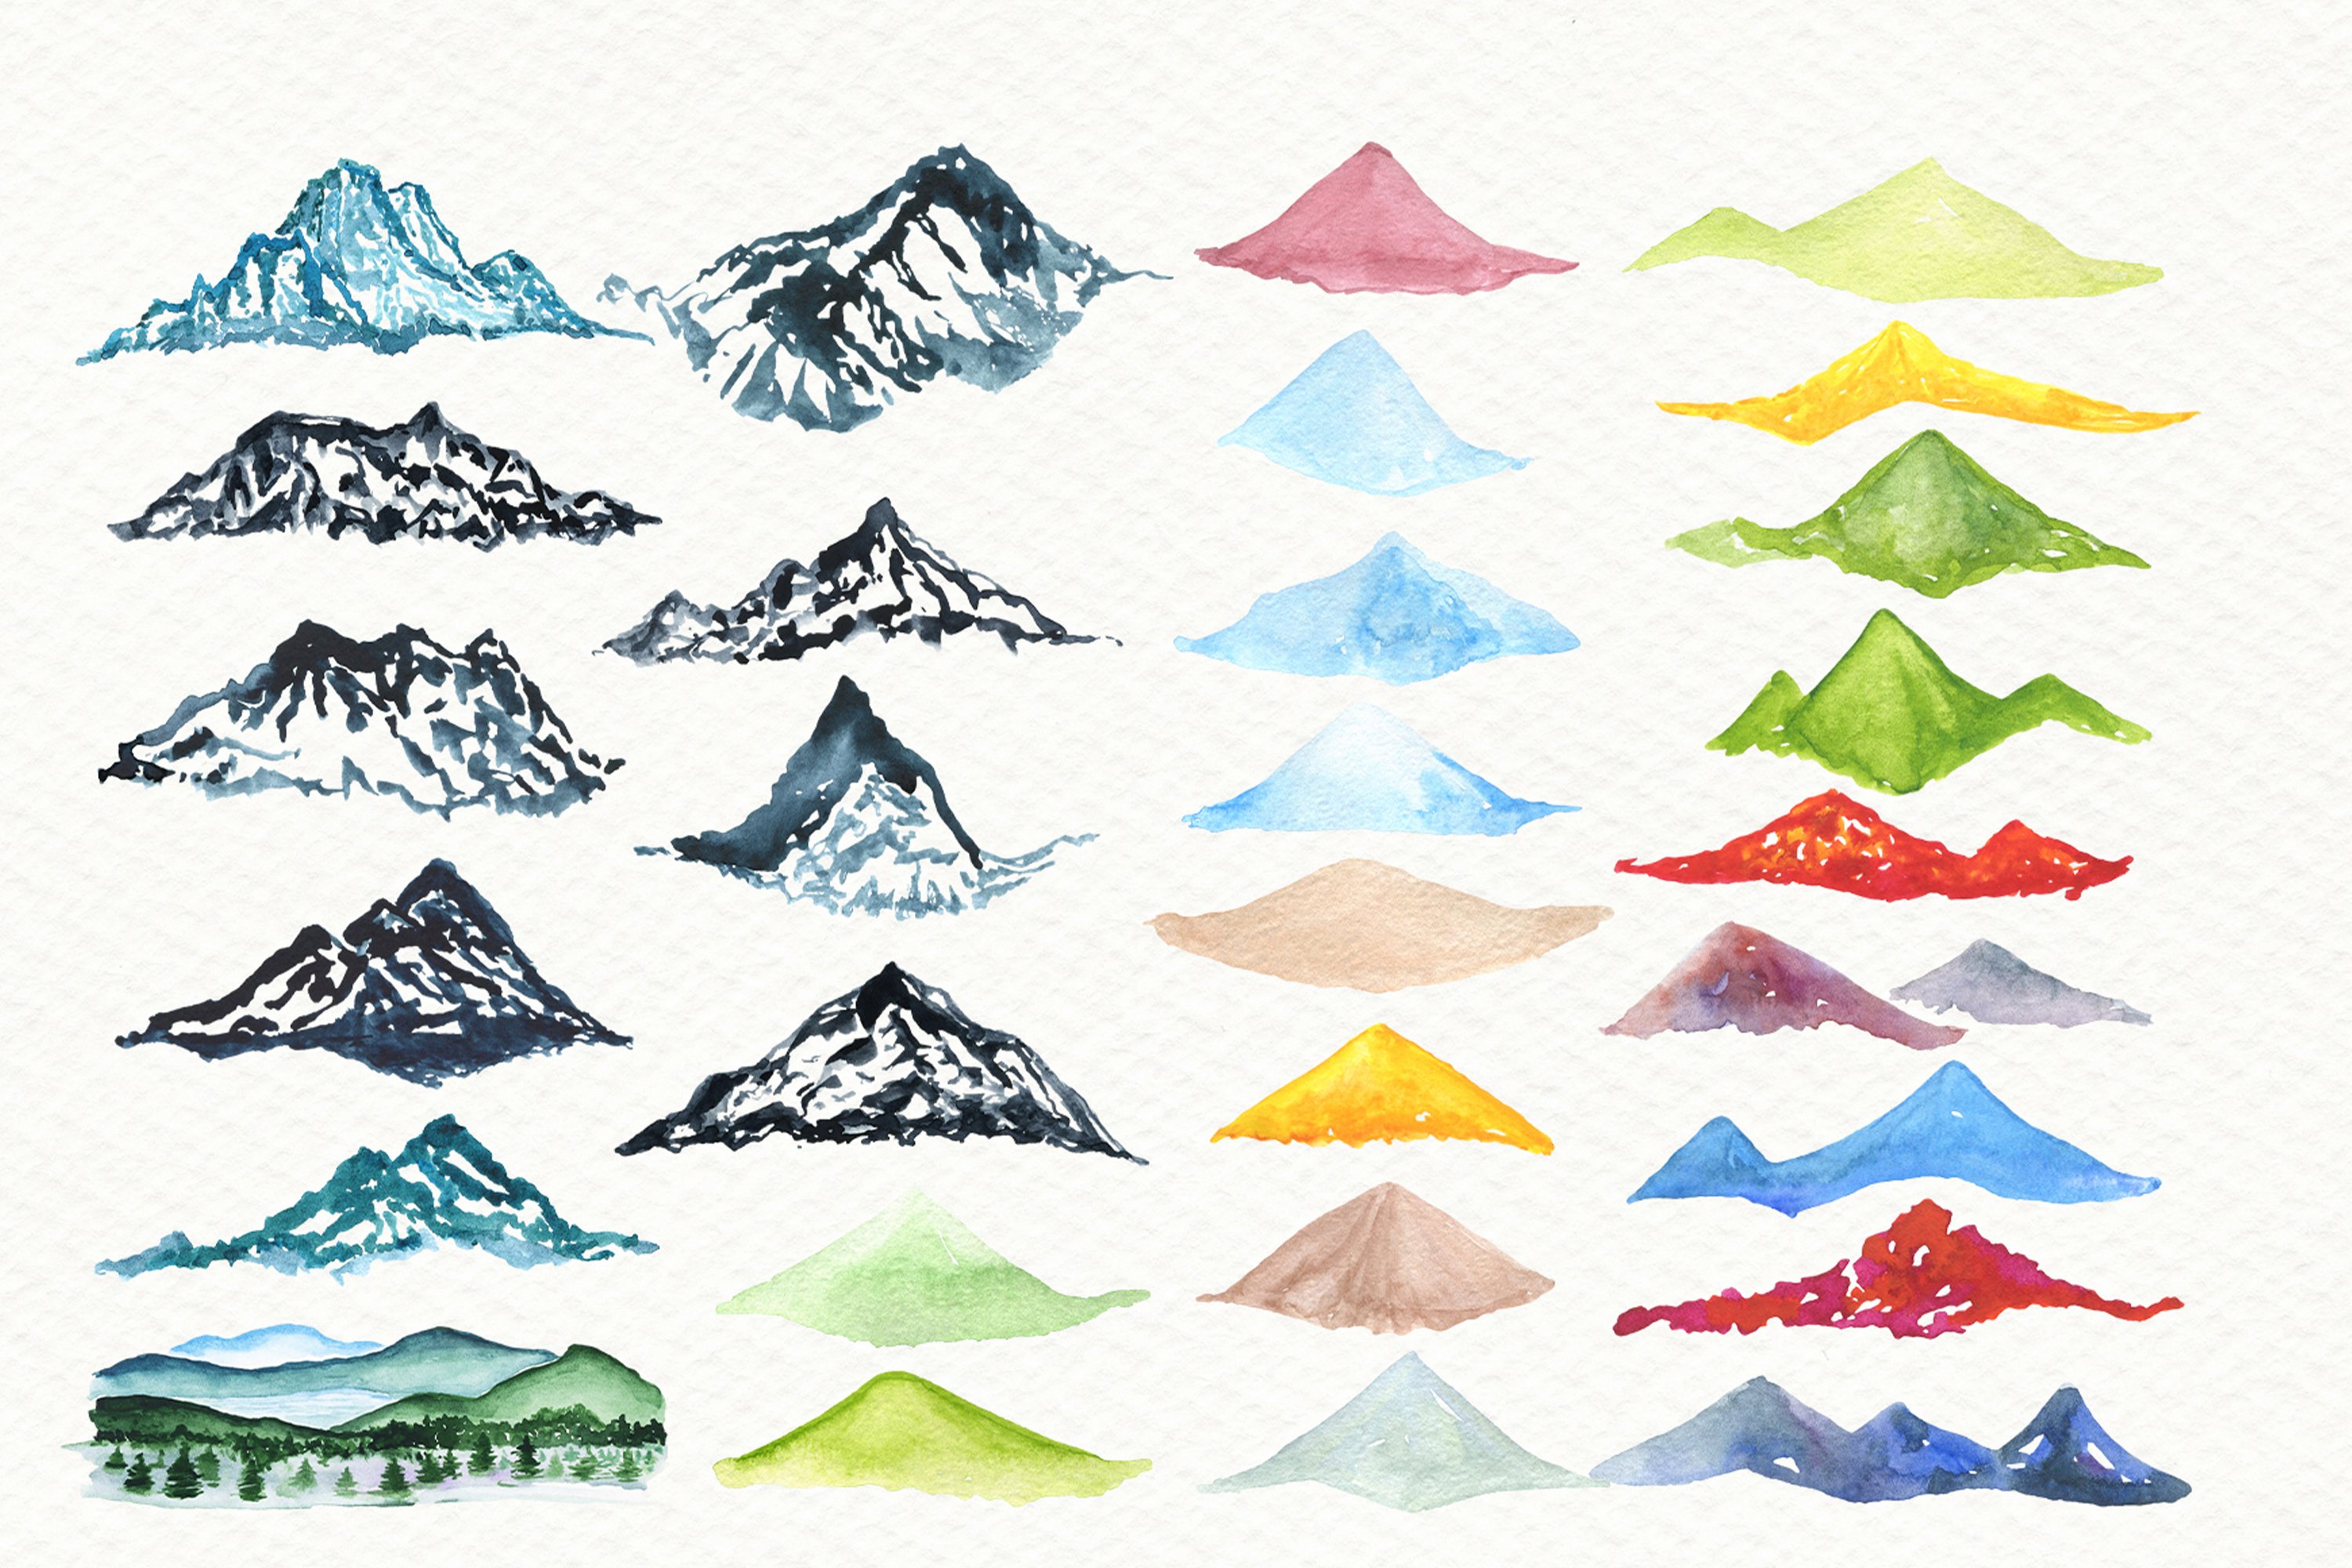 Painted mountains of different shapes and colors.